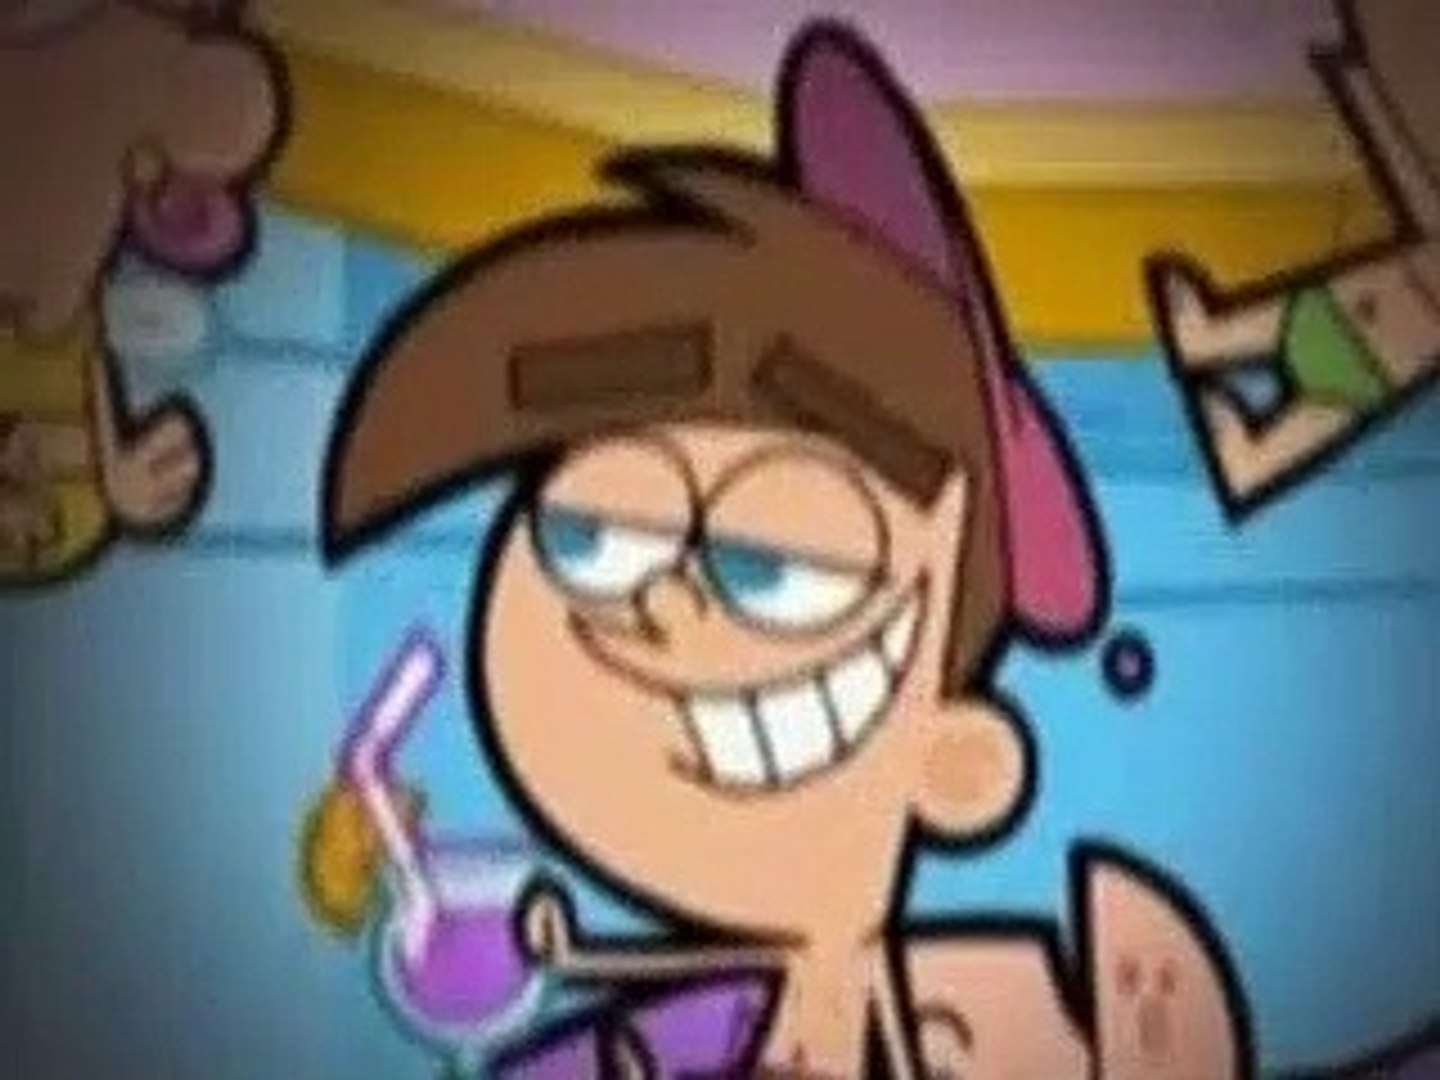 The Fairly OddParents S05E16 - Timmy TV - video Dailymotion